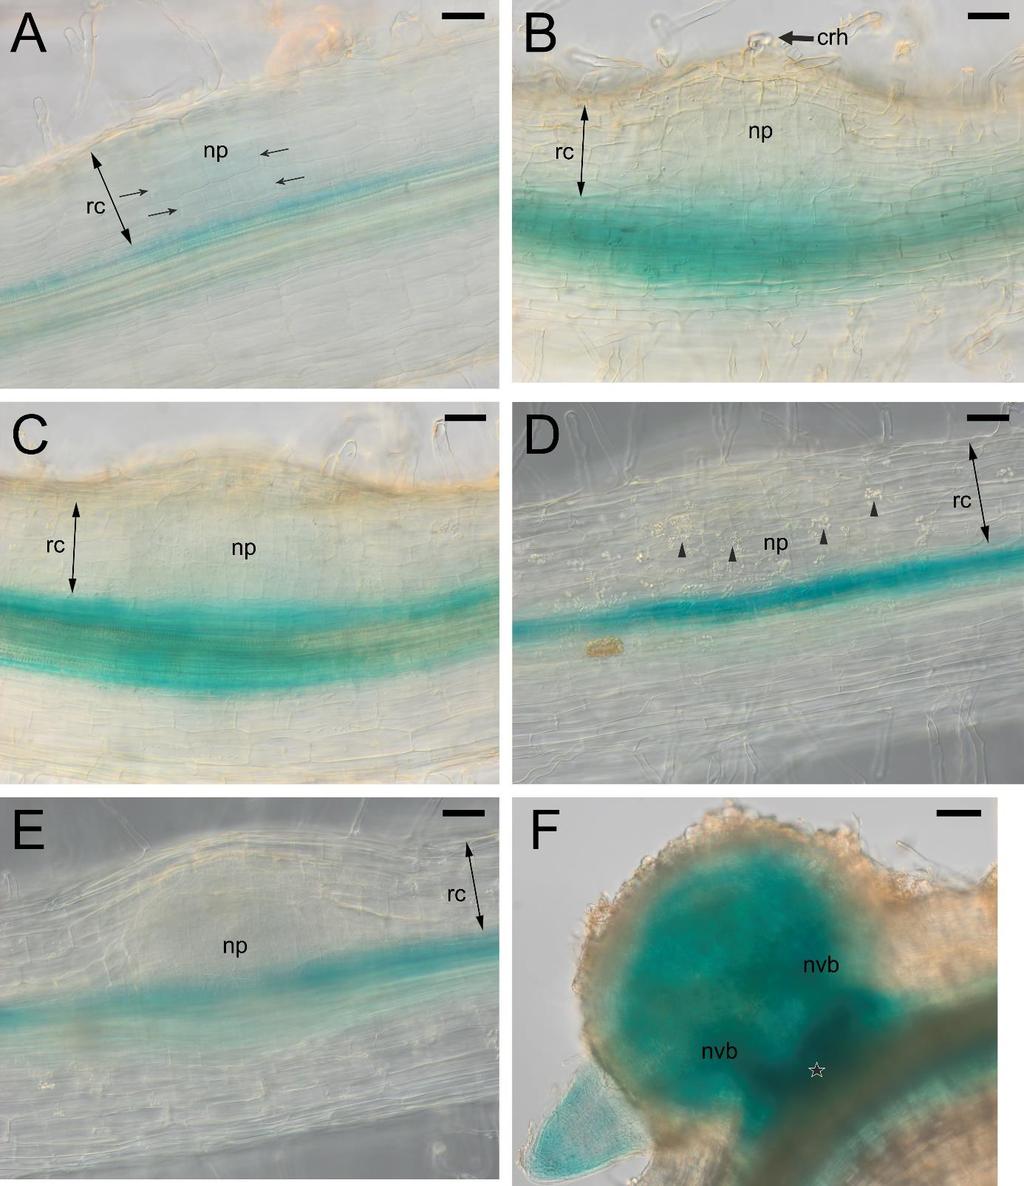 Figure S11. The pattern of LjPIN5 expression in the initial (A), hidden (B, C, D, E) and emerged (F) root nodule primordia.